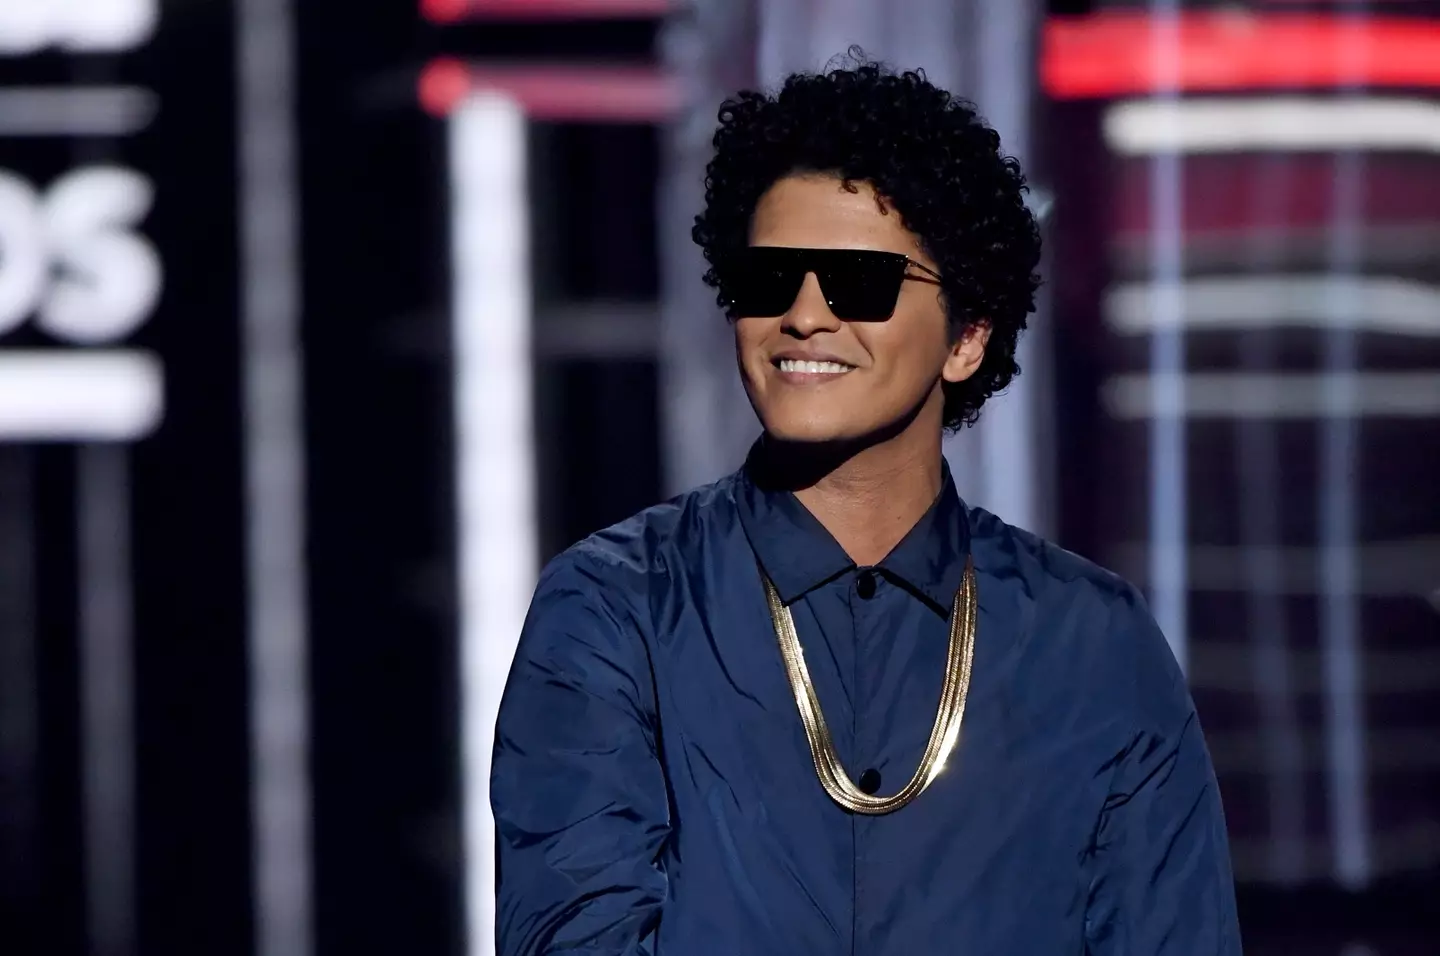 An 'insider' claimed Bruno Mars had racked up 'millions' in debt to MGM.